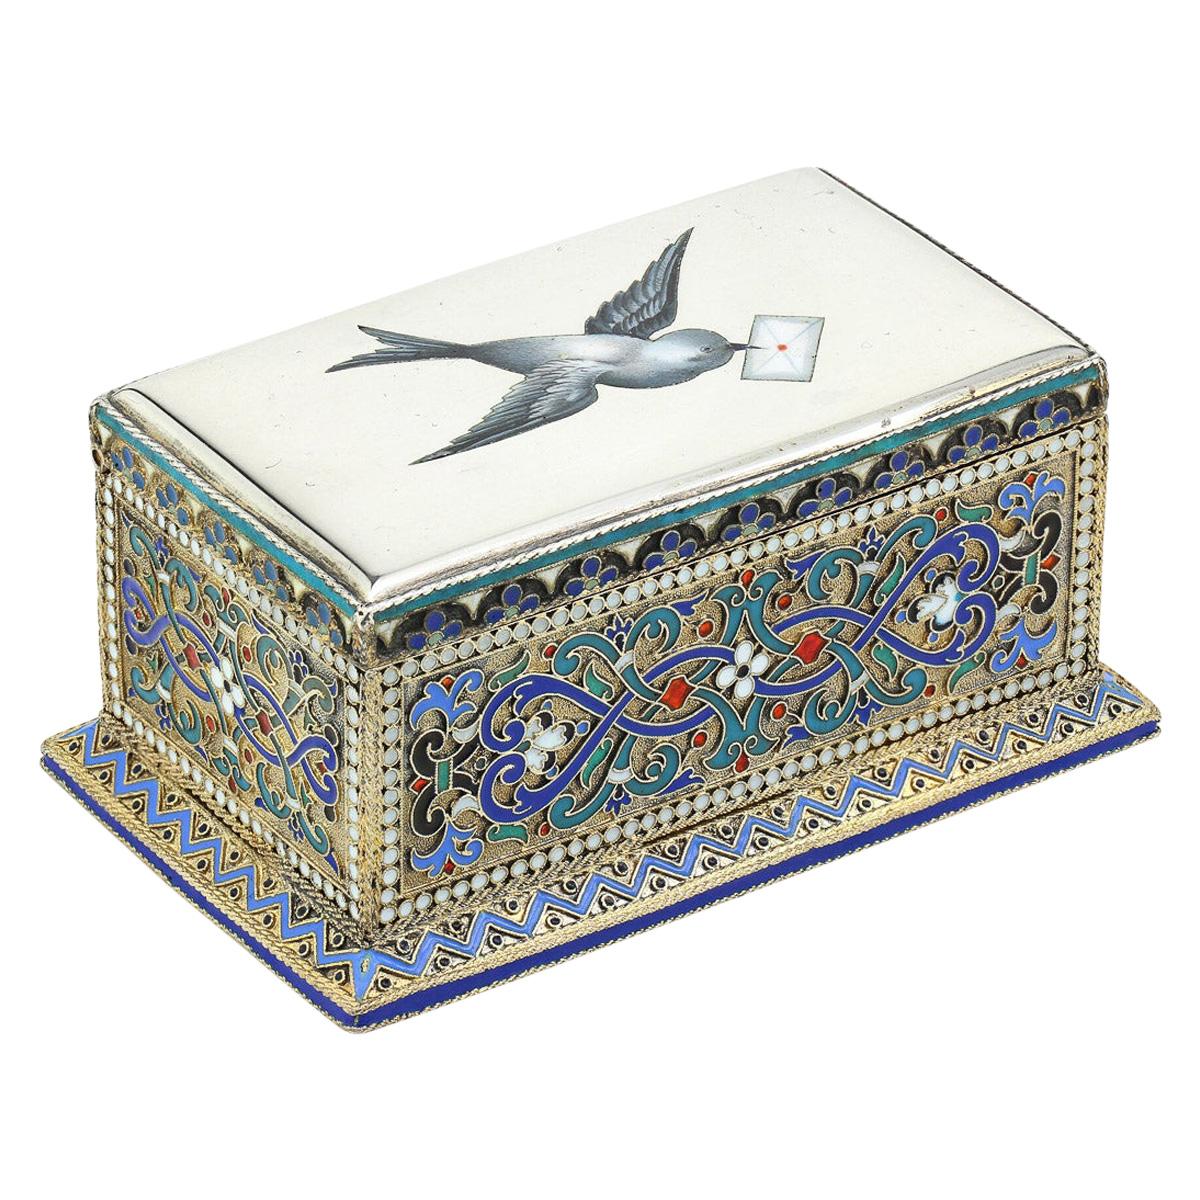 19th Century Russian Solid Silver & Enamel Stamp Box, c.1888